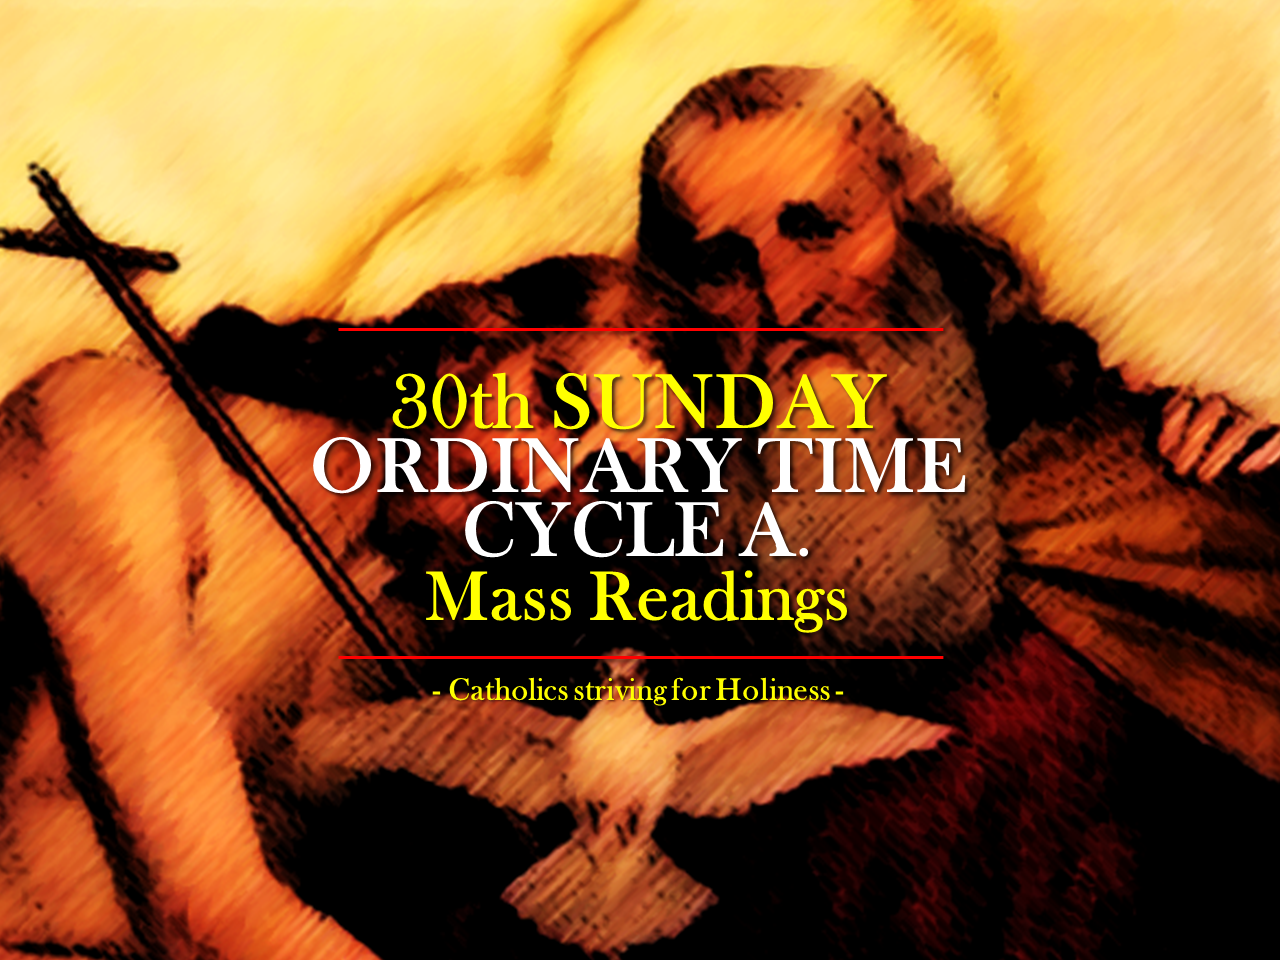 Mass readings 30th S. O.T. (A) 4